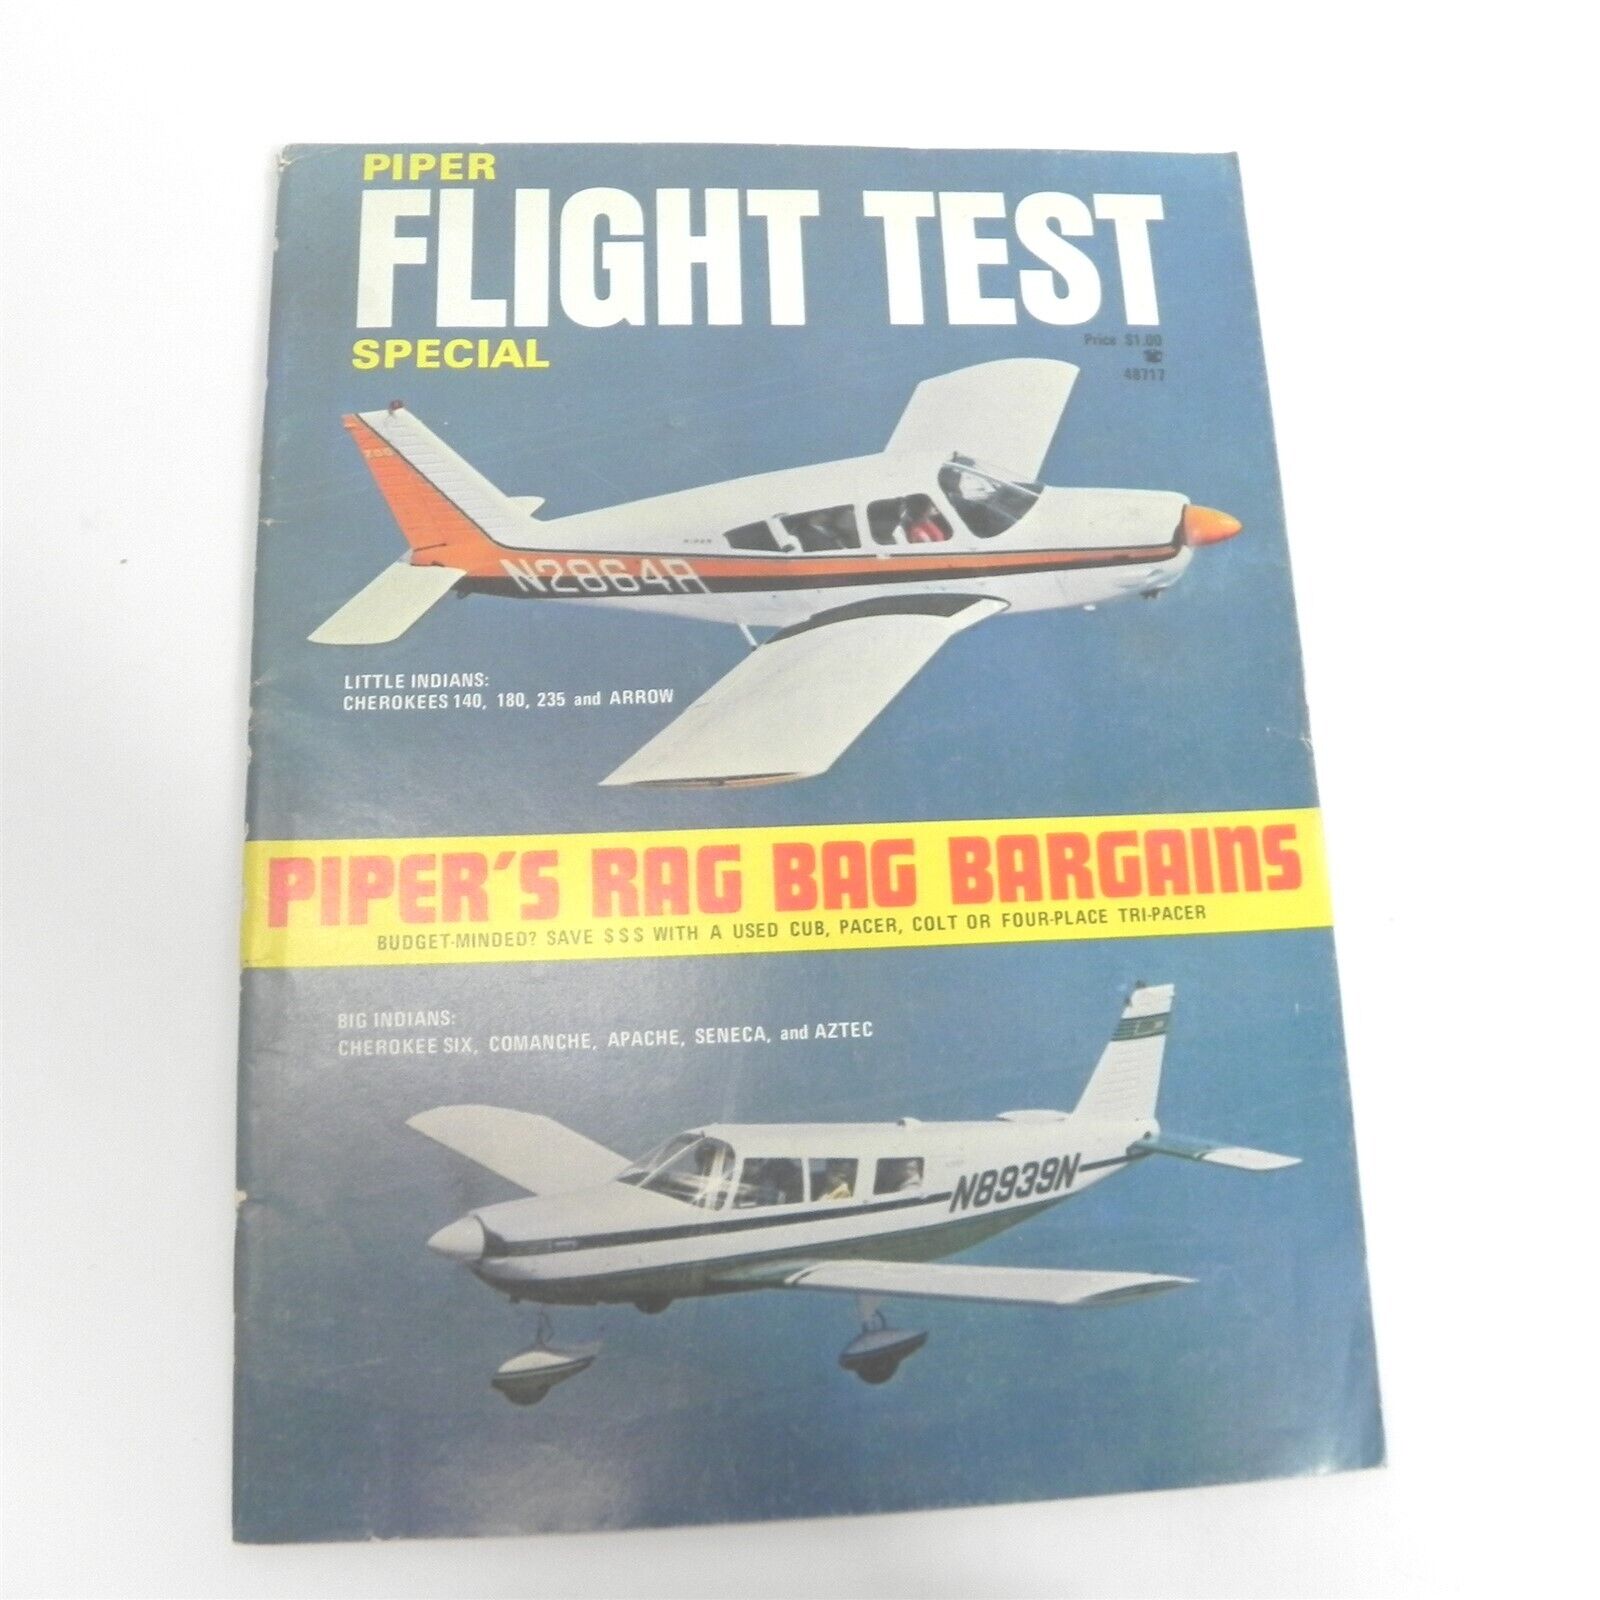 VINTAGE 1972 PIPER FLIGHT TEST SPECIAL BY PLANE & PILOT MAGAZINE SINGLE ISSUE 